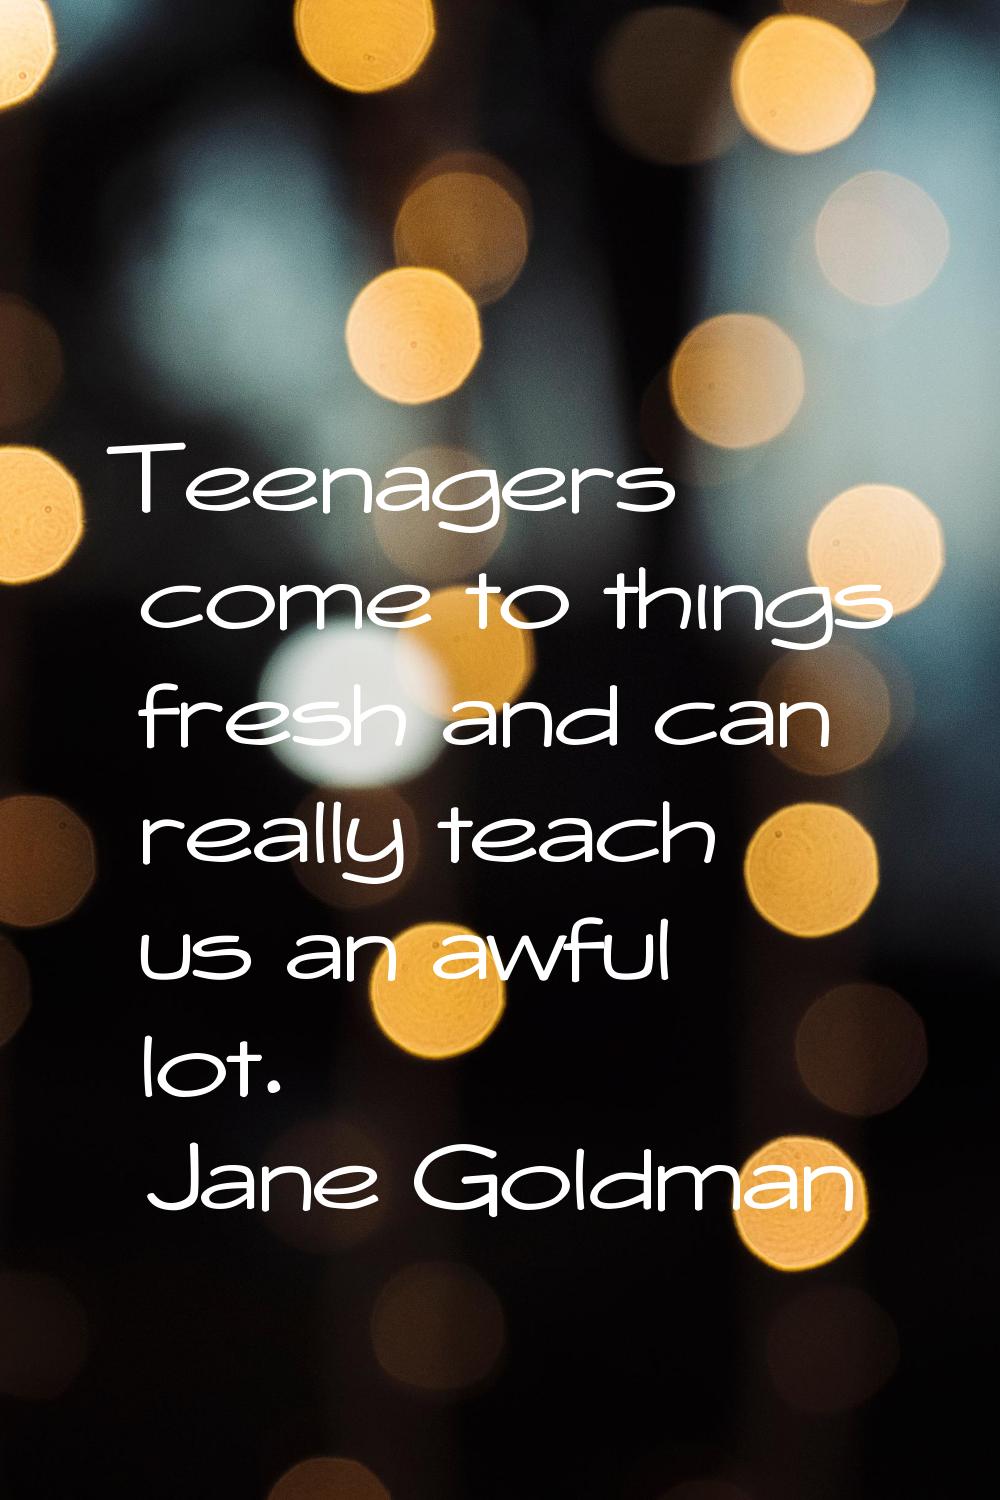 Teenagers come to things fresh and can really teach us an awful lot.